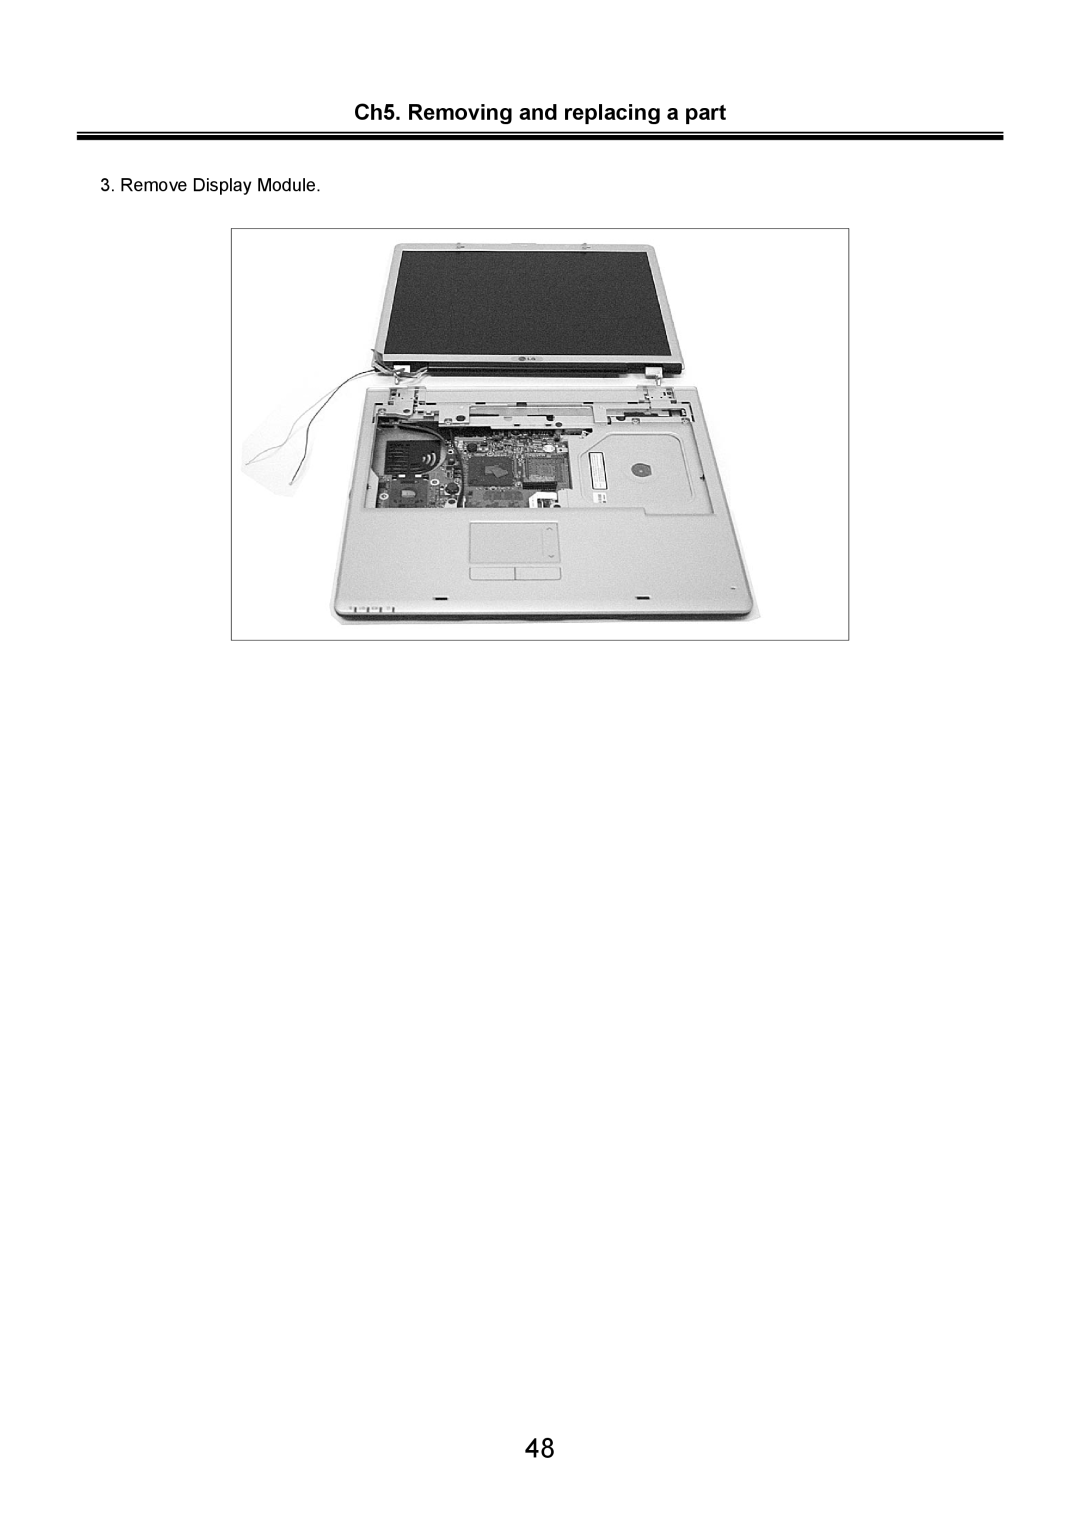 LG Electronics LS70 service manual Ch5. Removing and replacing a part, Remove Display Module 